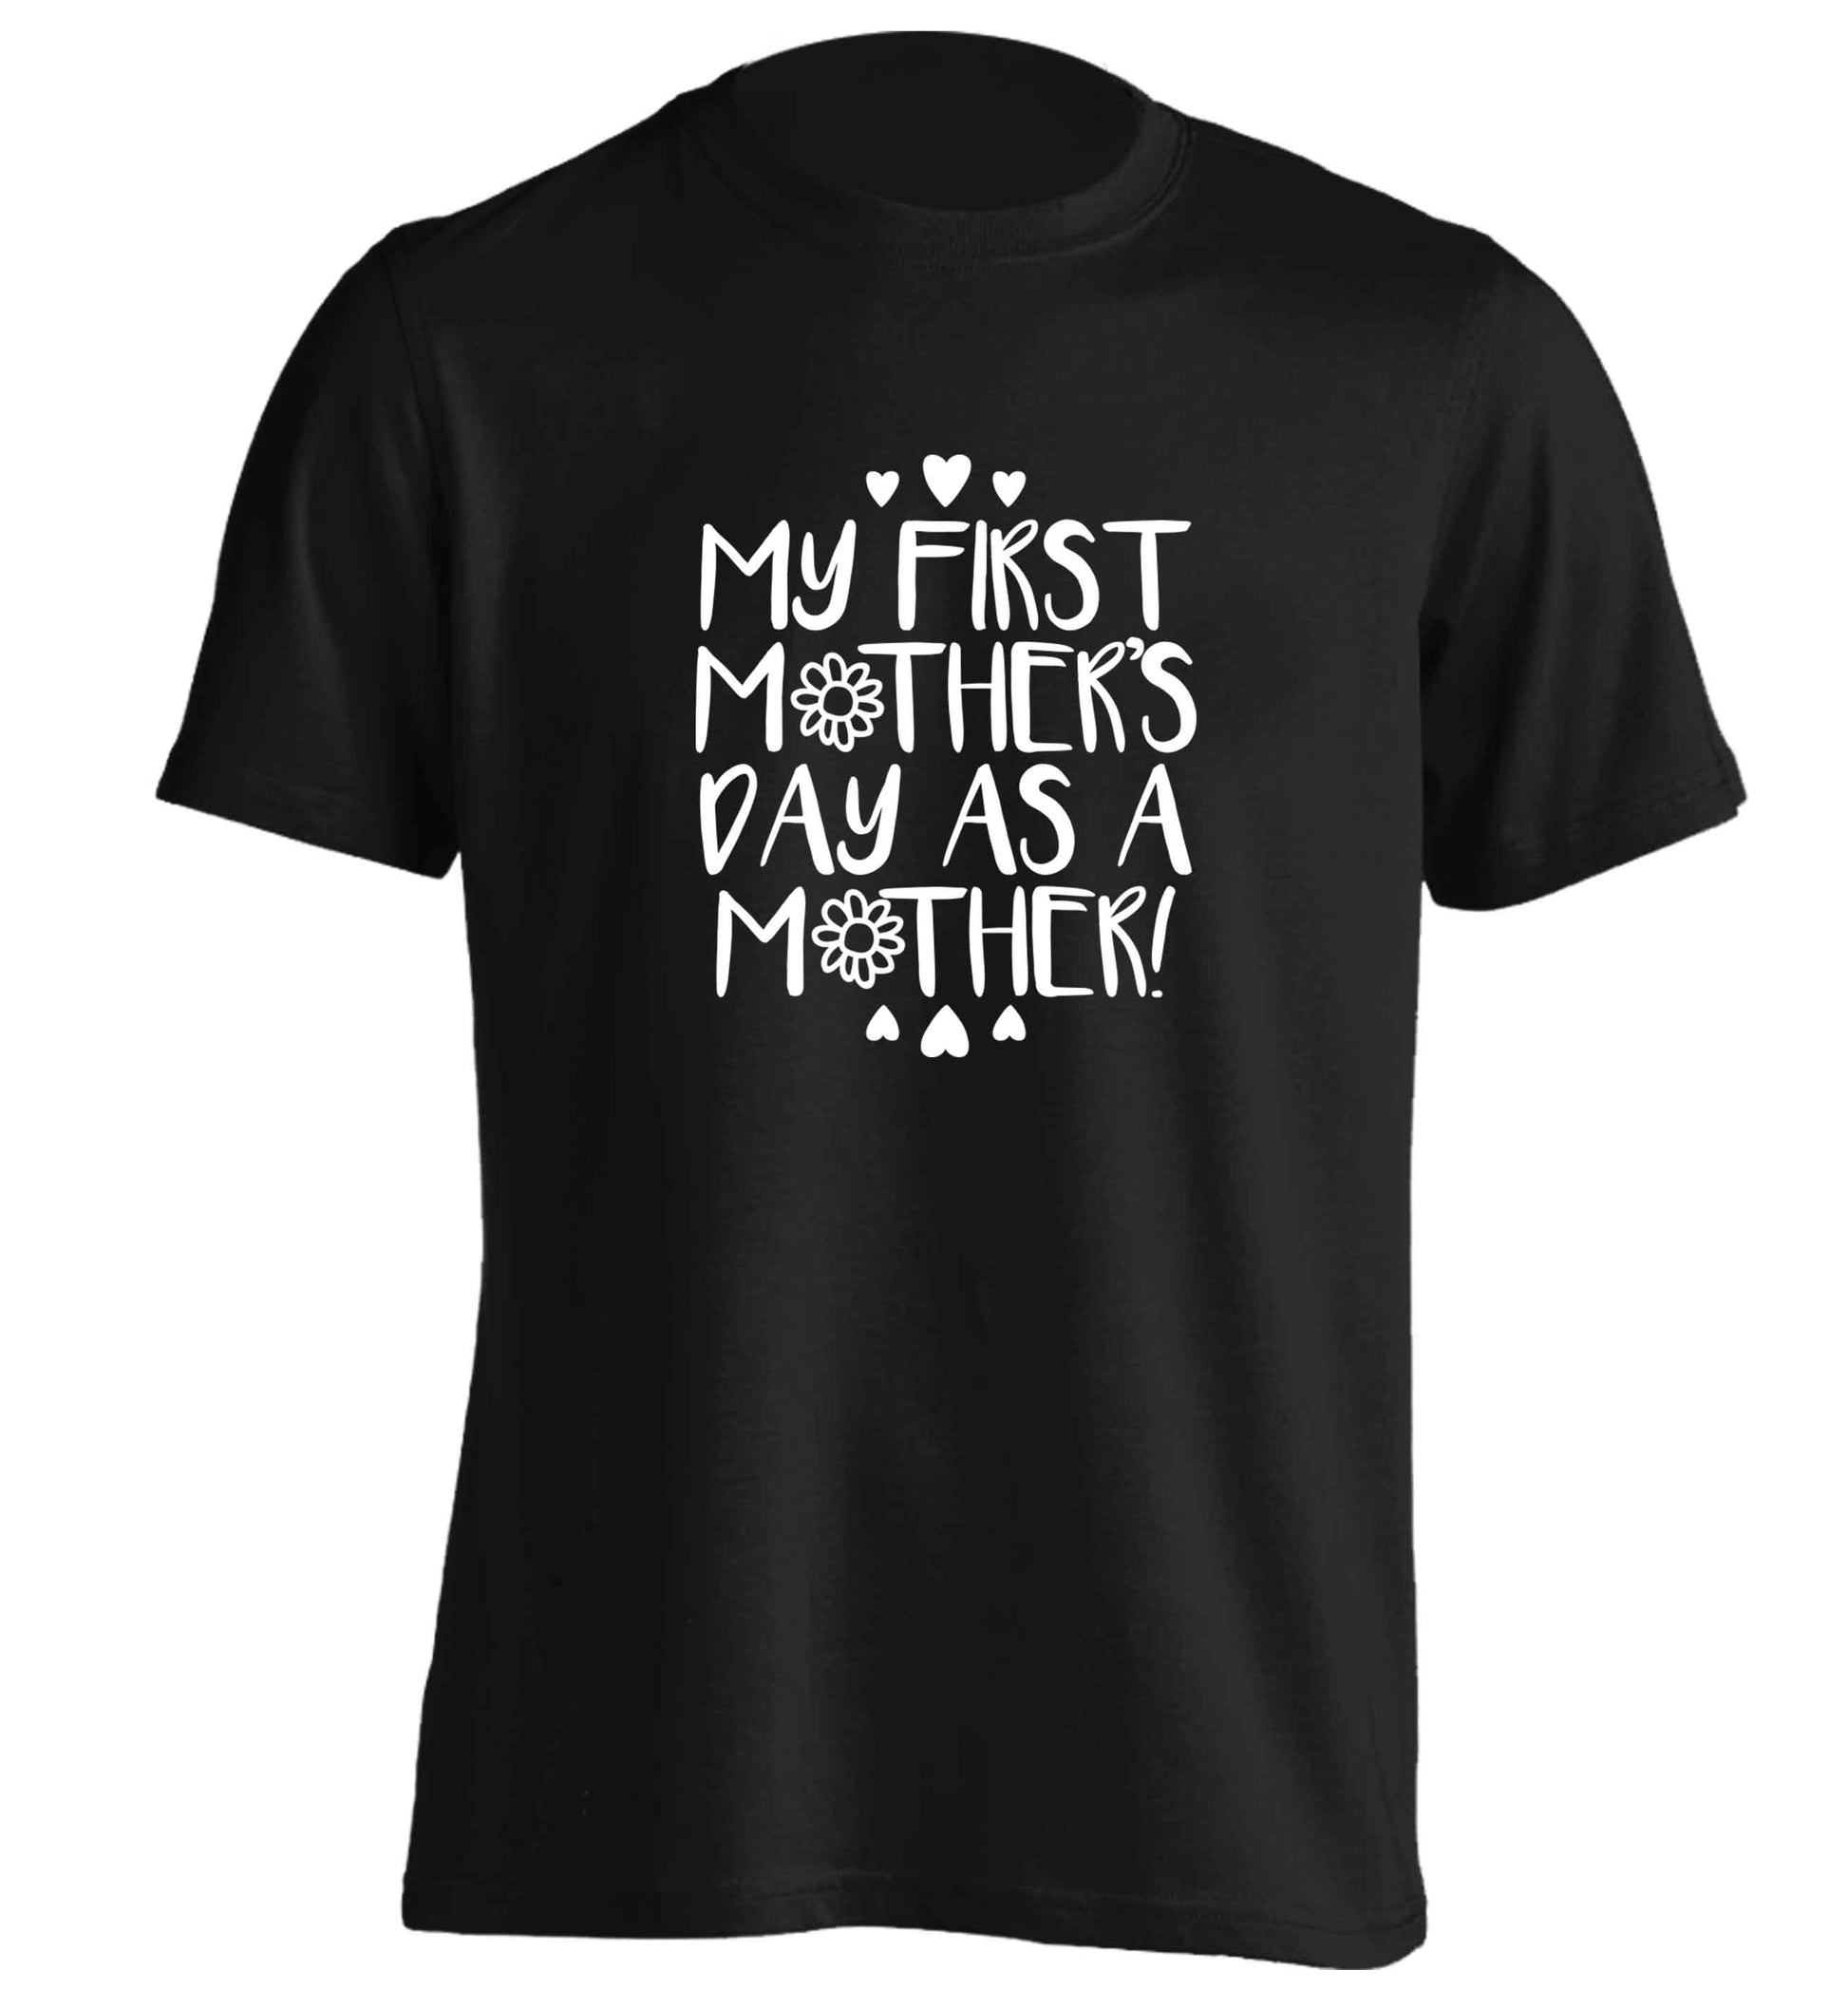 It's my first mother's day as a mother adults unisex black Tshirt 2XL